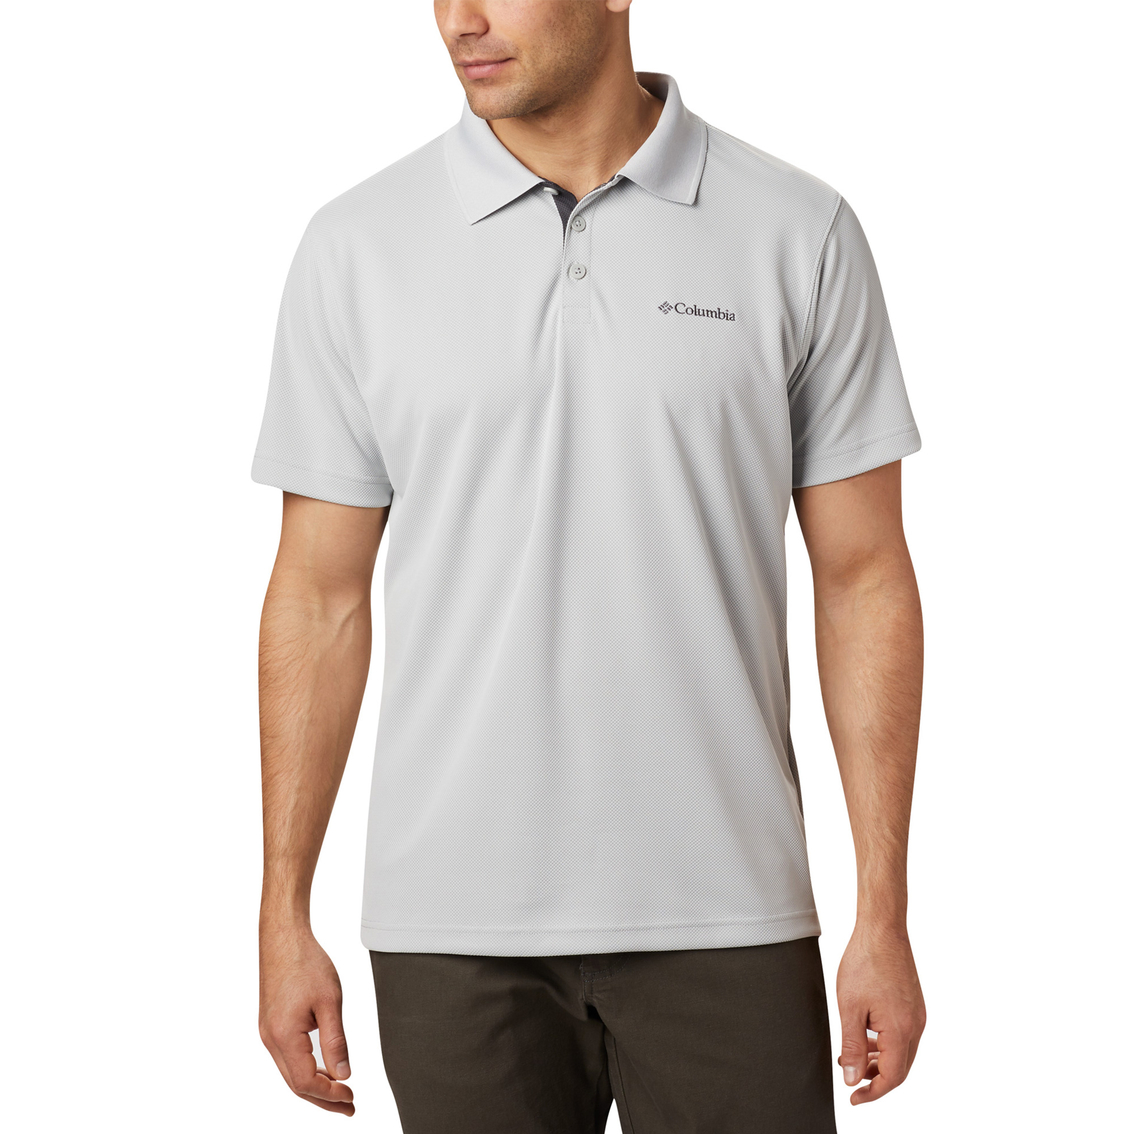 Columbia Utilizer Polo Shirt | Polos | Clothing & Accessories | Shop ...